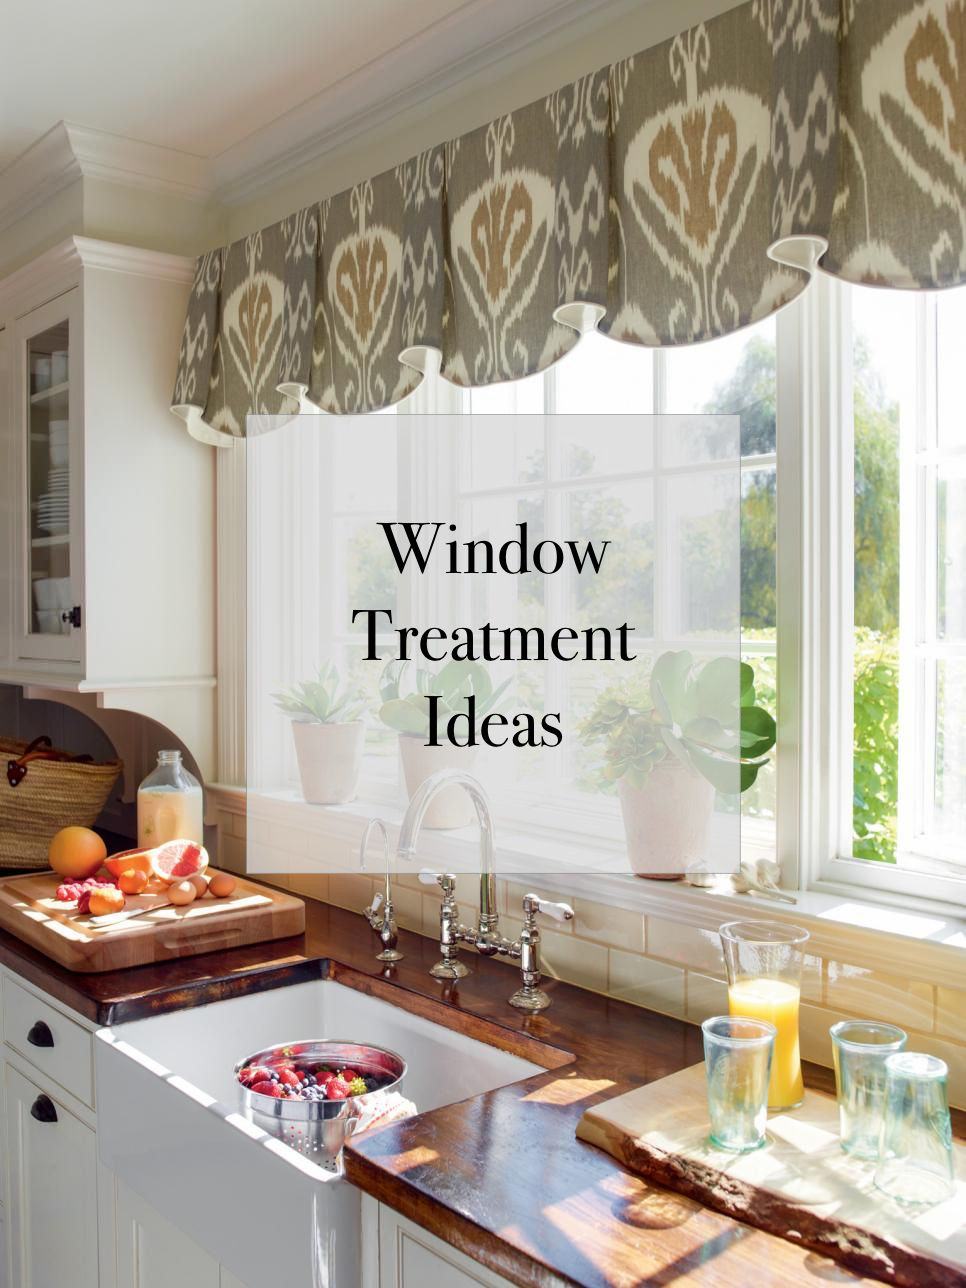 kitchen window treatment ideas inspiration blinds shades valances curtains drapery and more bay curtain b